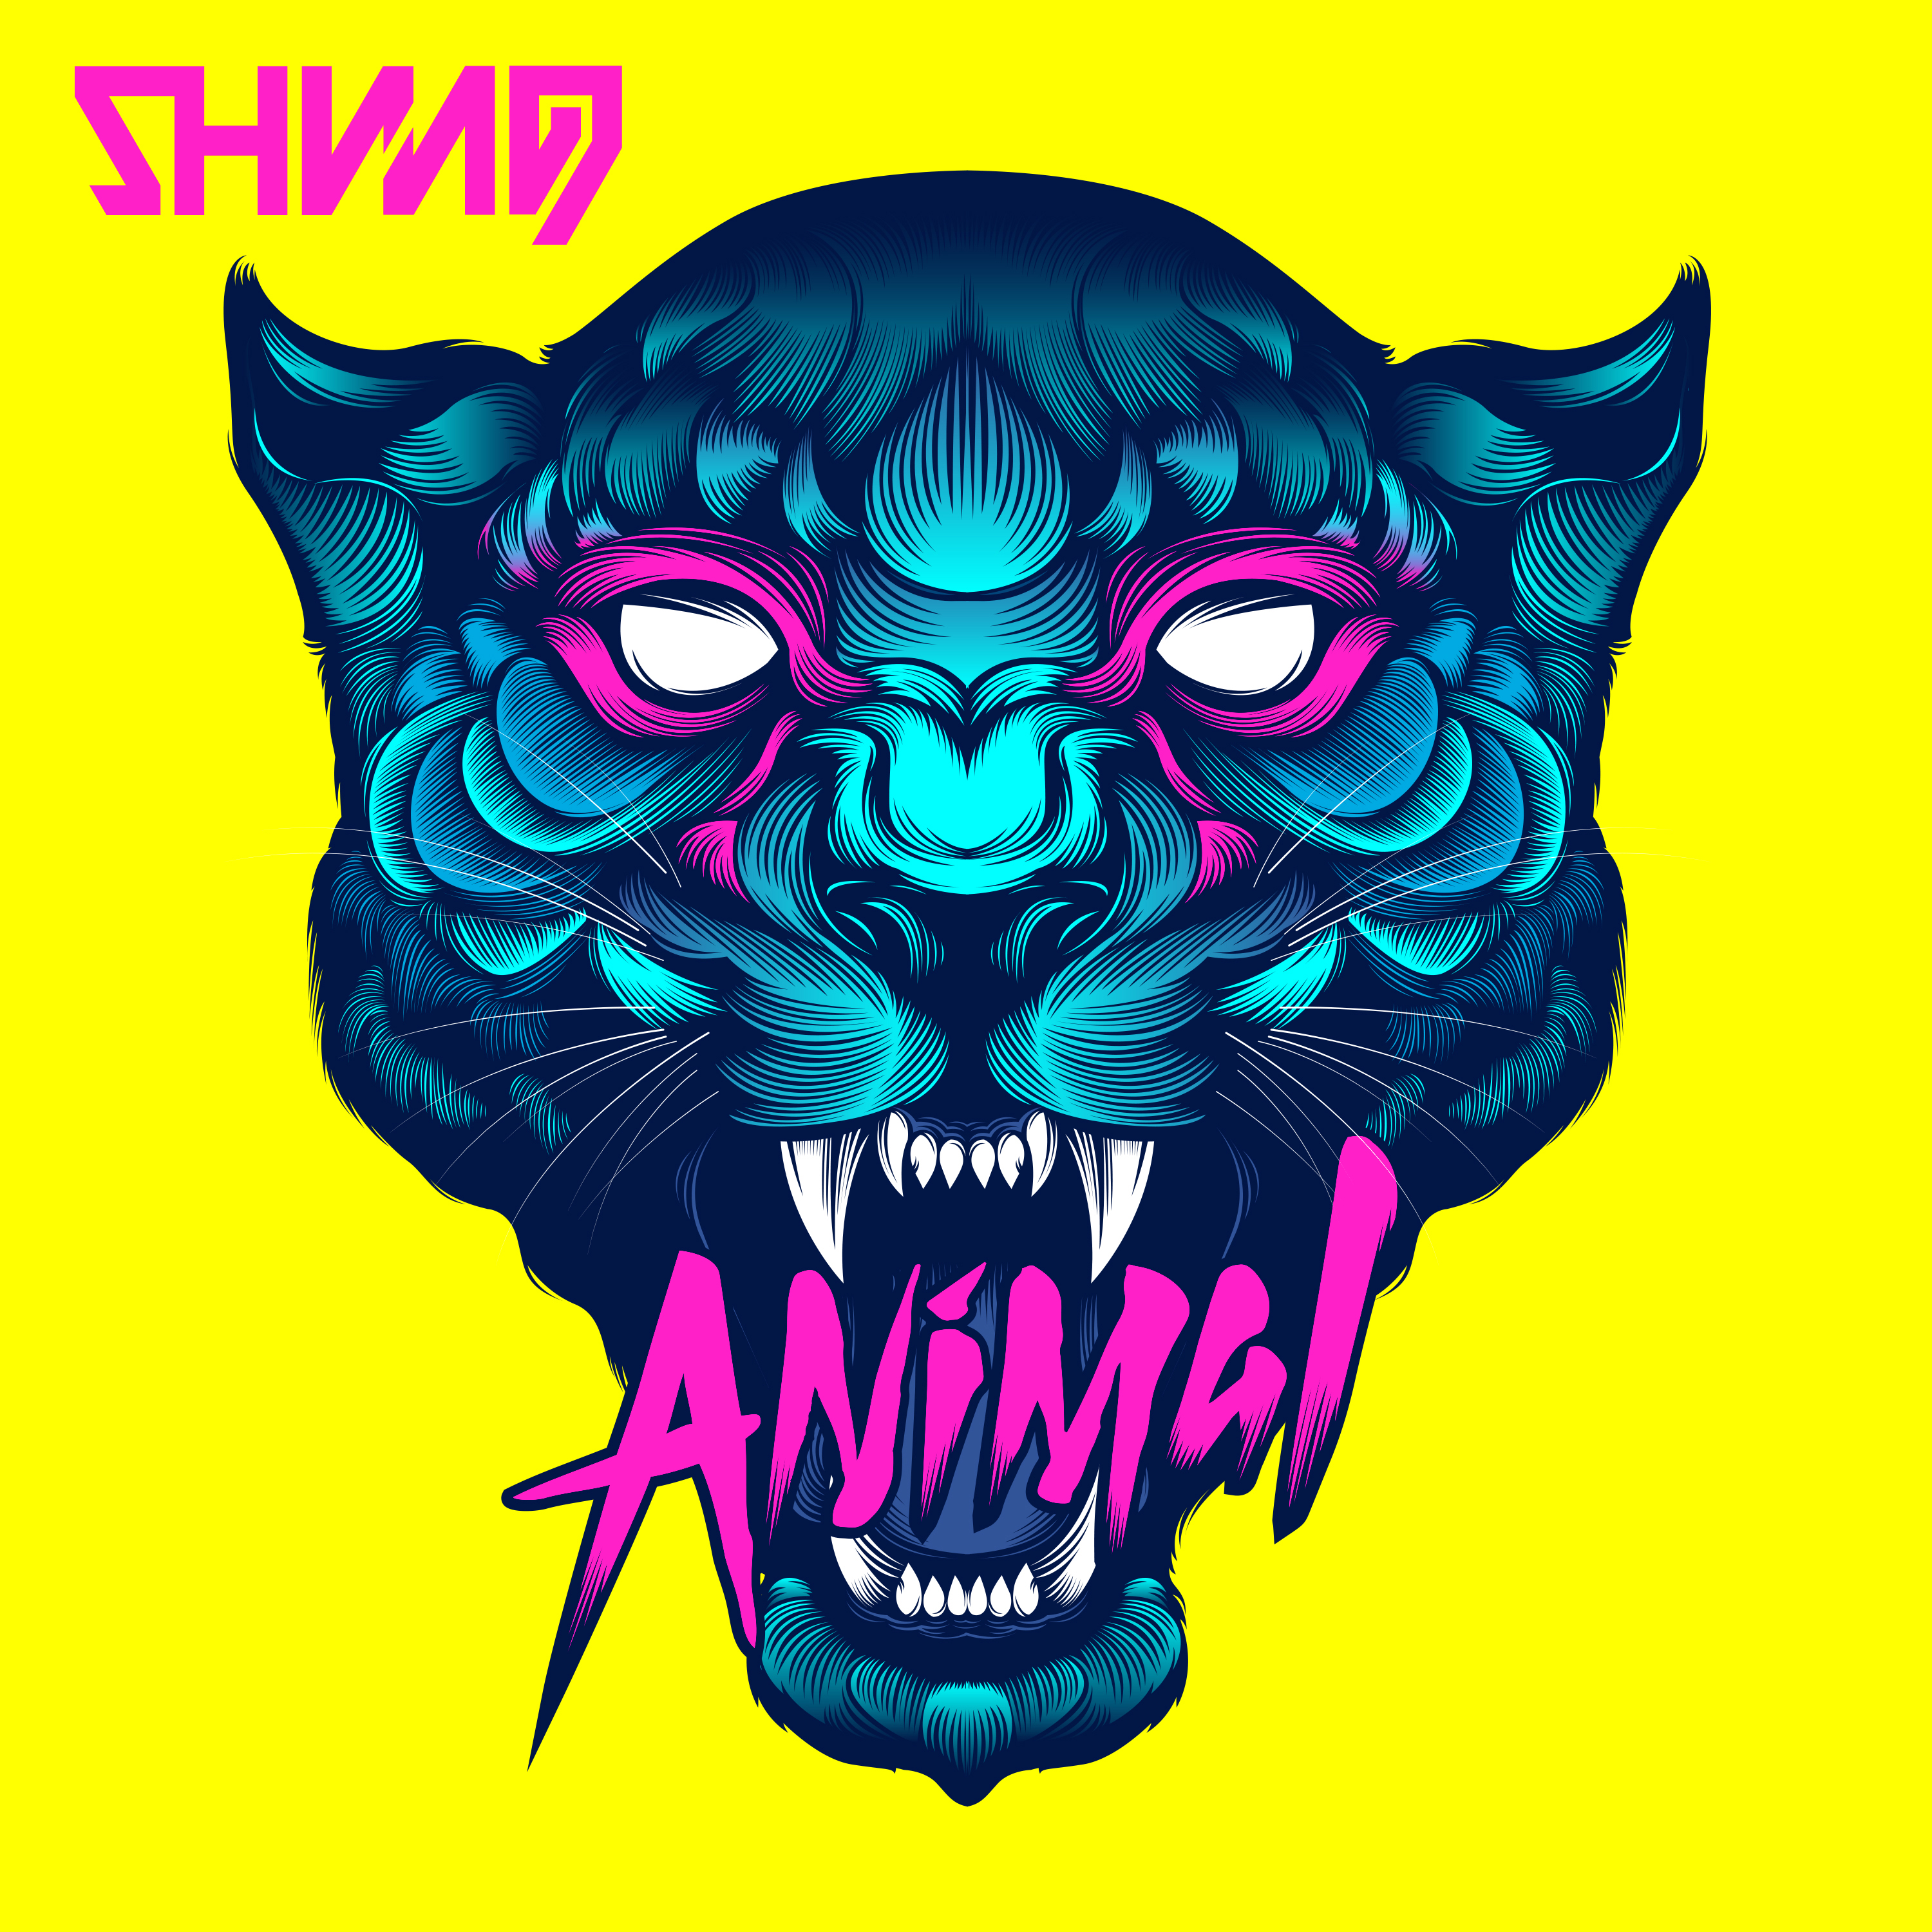 Shining - Animal front cover